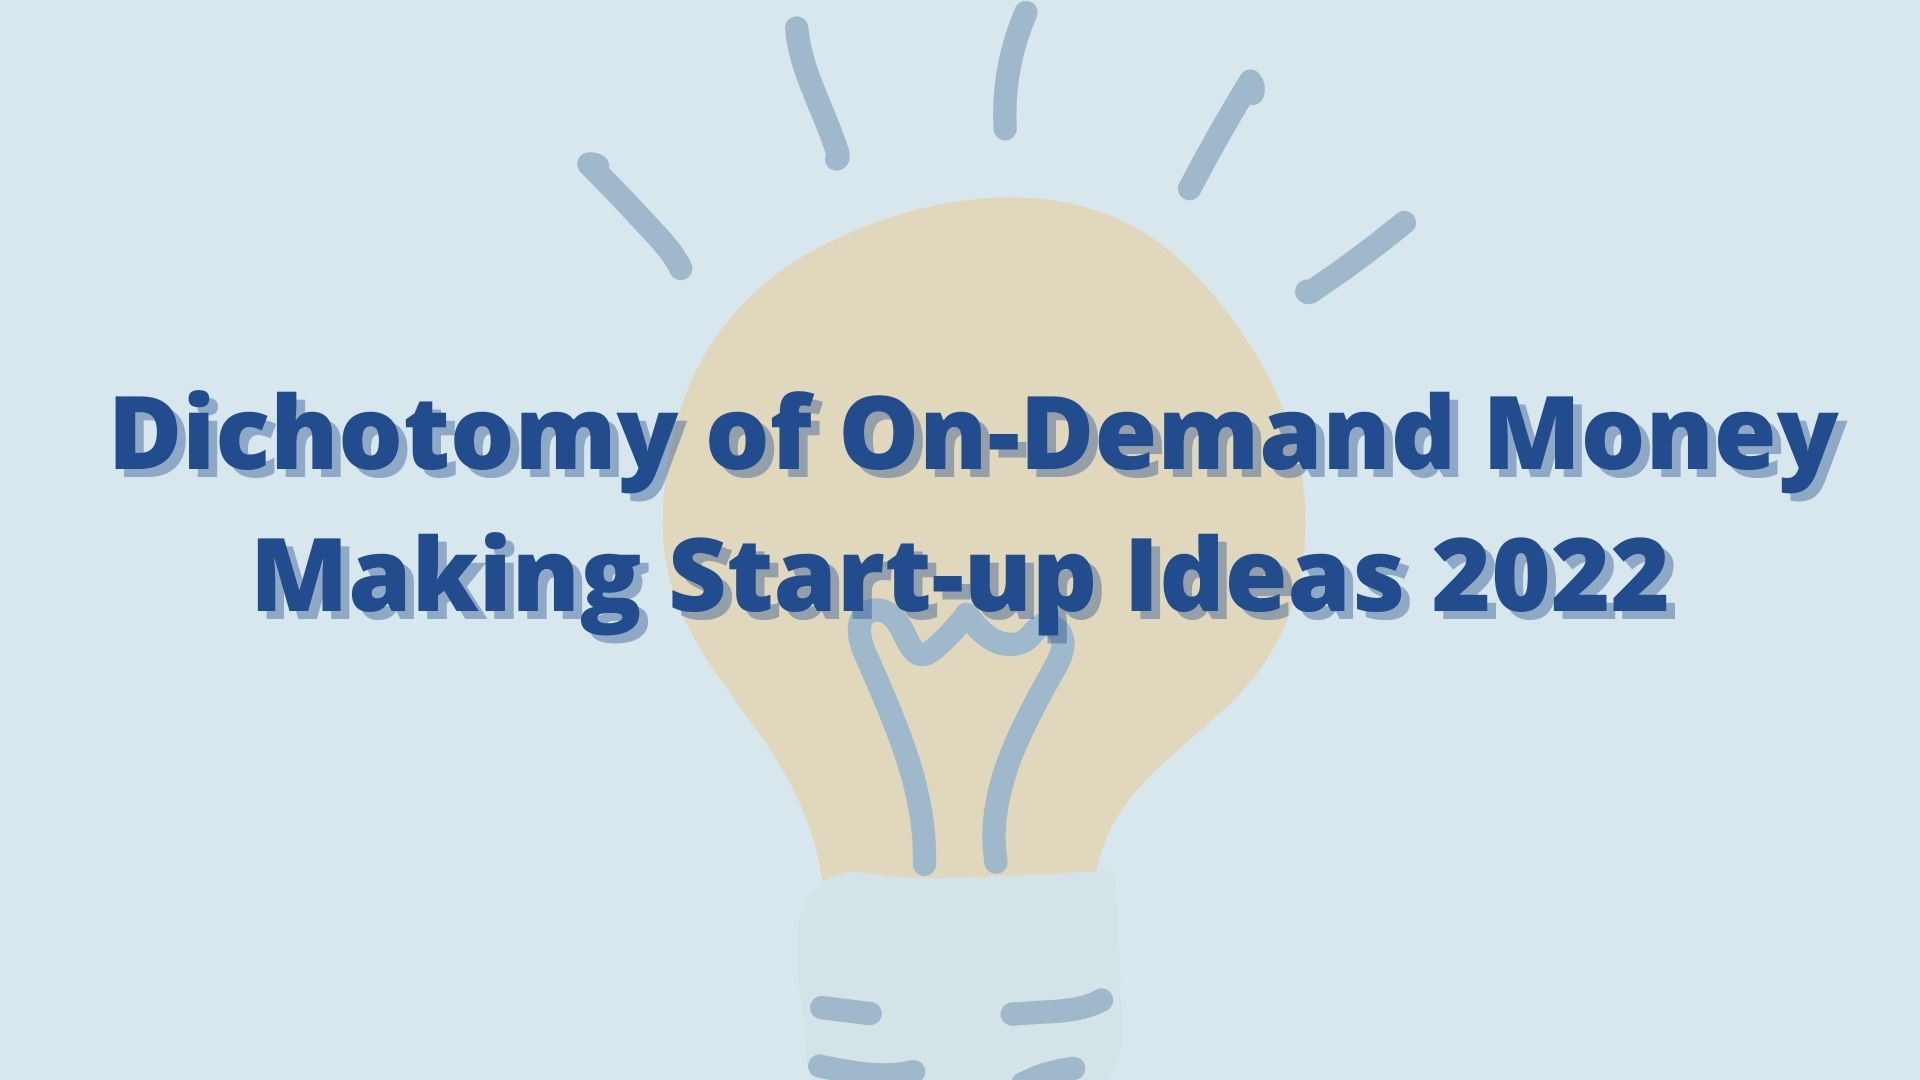 The Dichotomy of On-Demand Money Making Start-up Ideas 2022